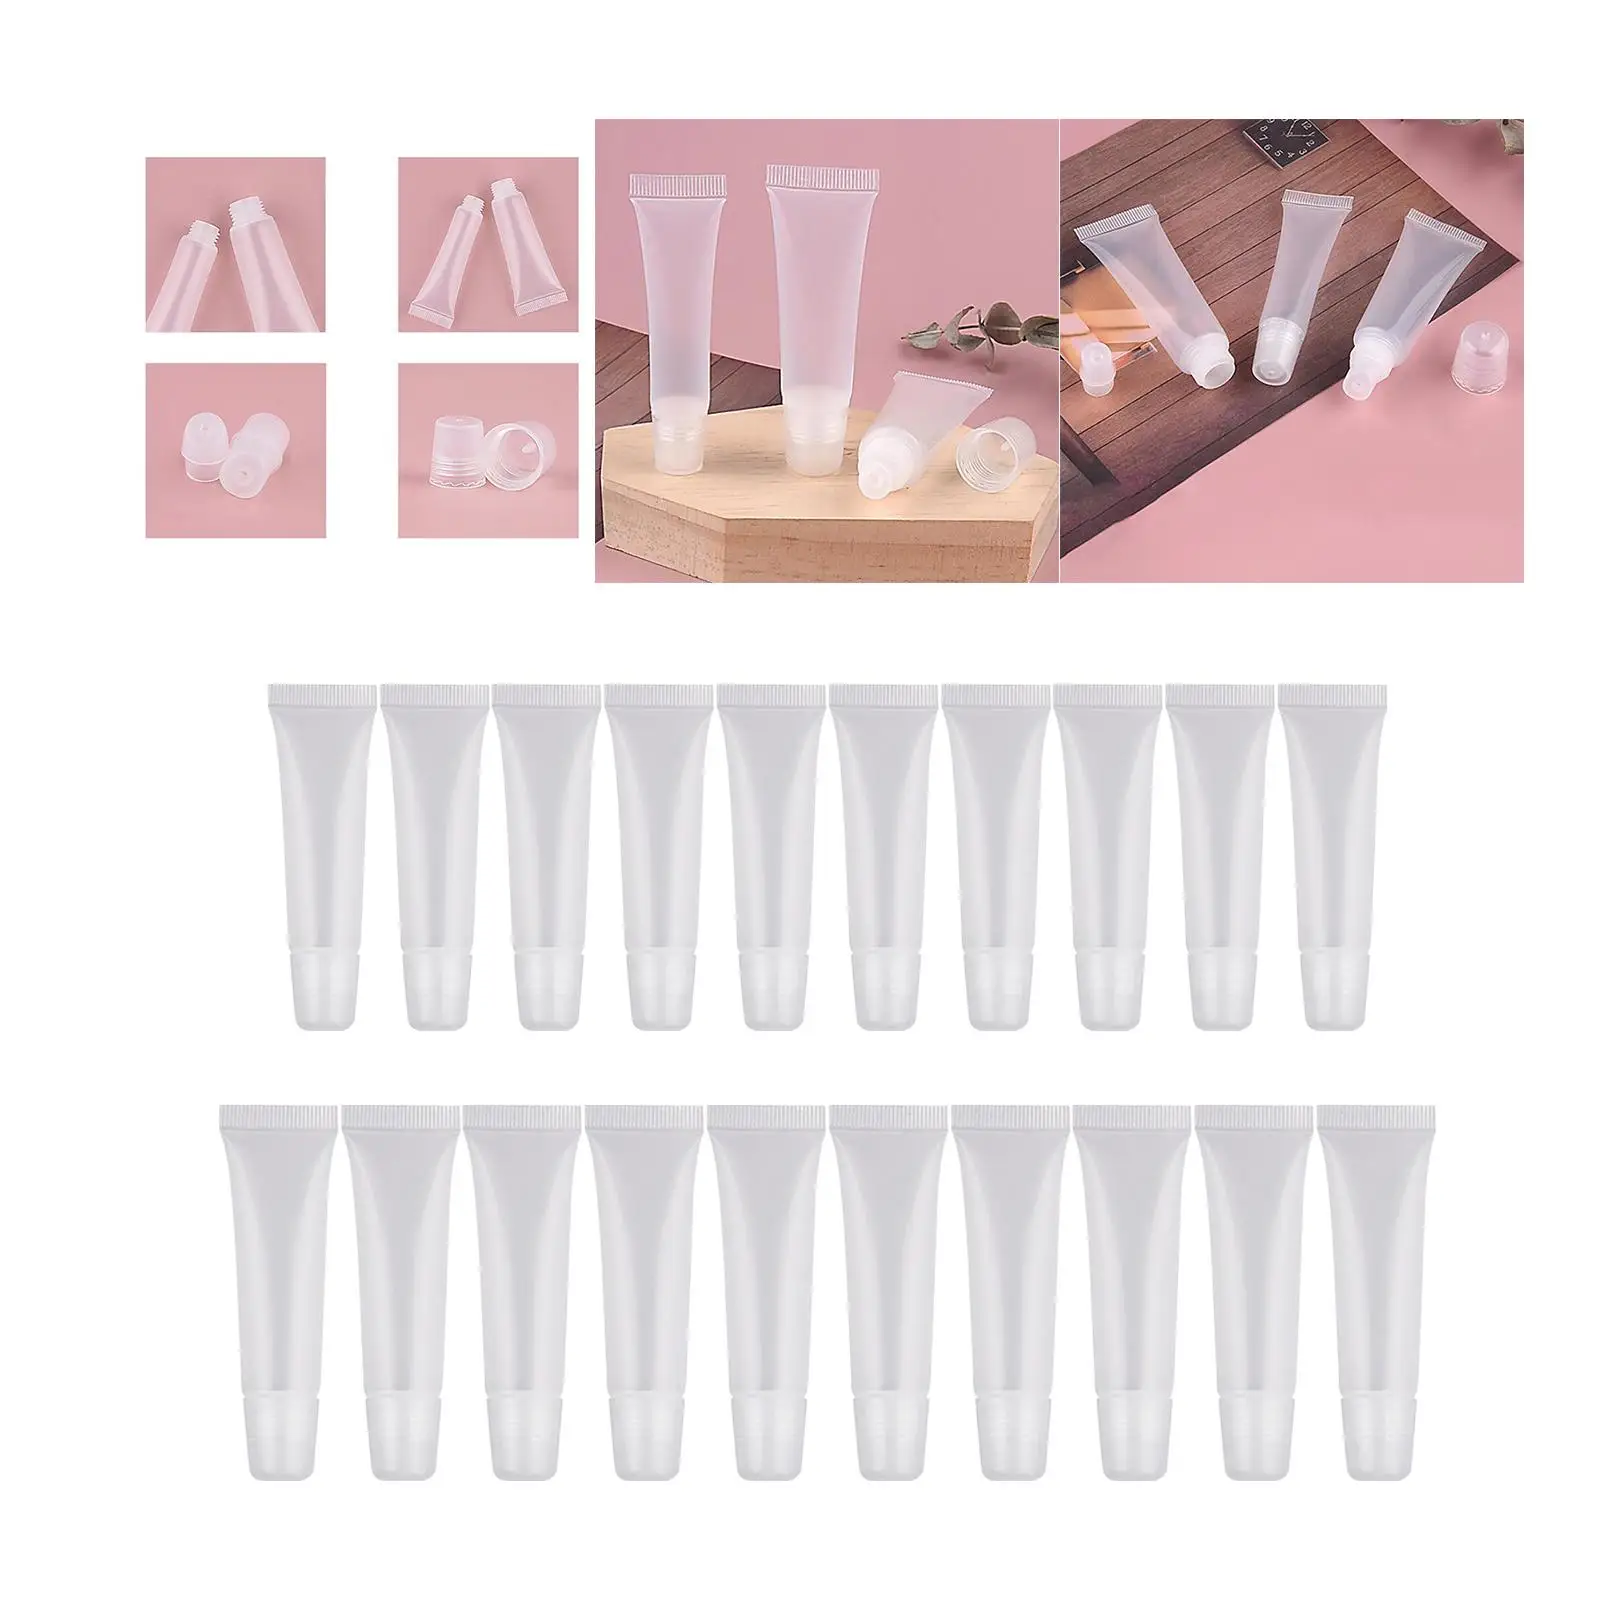 10Pcs  Tubes Empty Soft Portable Refillable with Caps Cosmetic Containers for Lipgloss Making Supplies Makeup